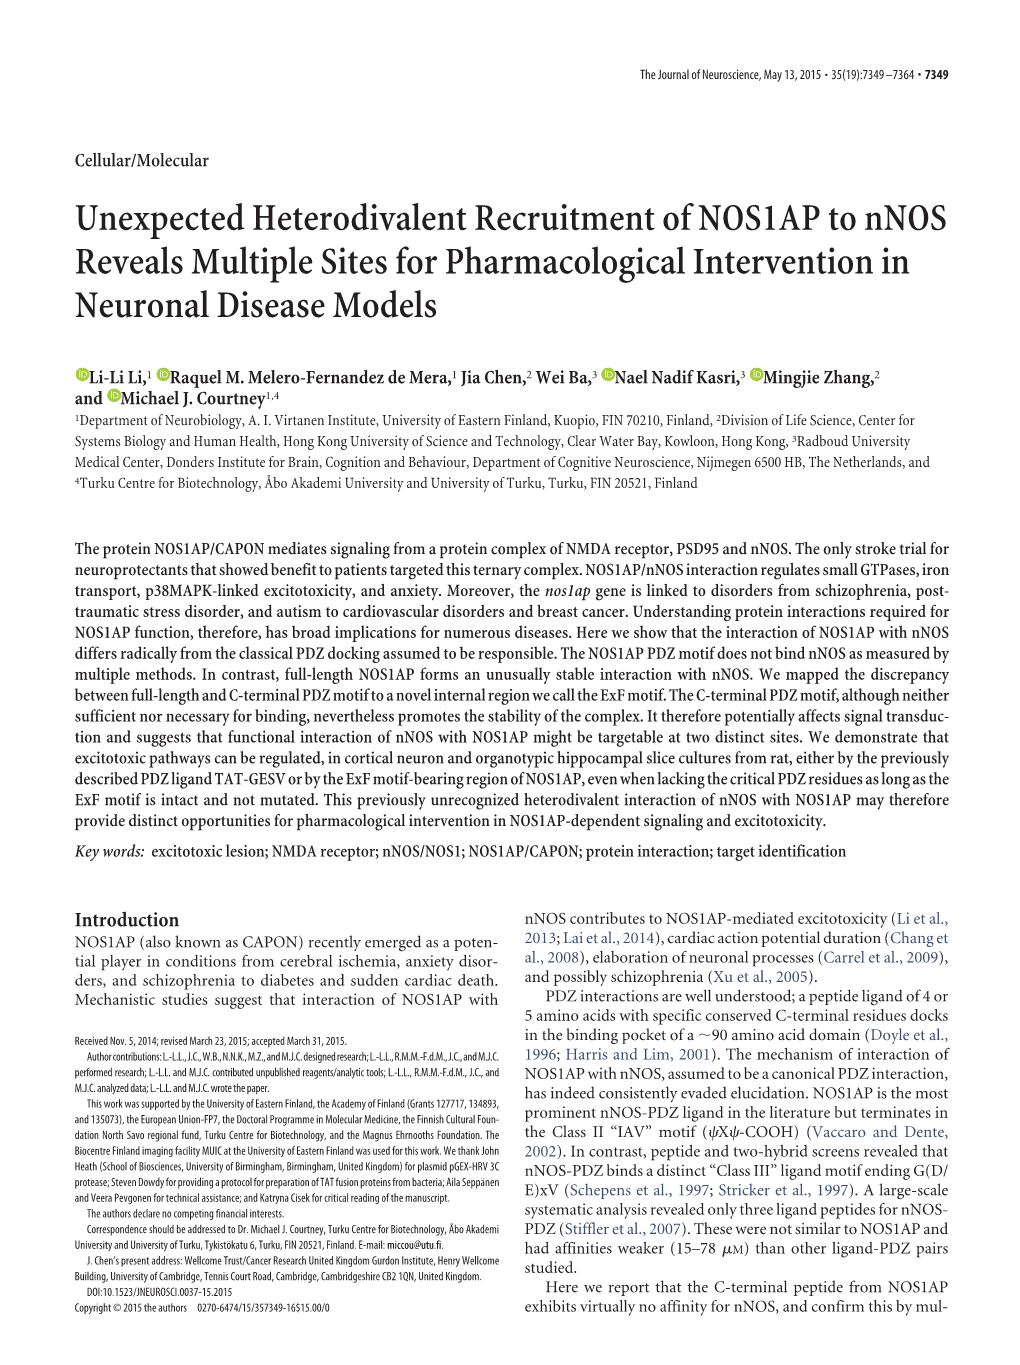 Unexpected Heterodivalent Recruitment of NOS1AP to Nnos Reveals Multiple Sites for Pharmacological Intervention in Neuronal Disease Models